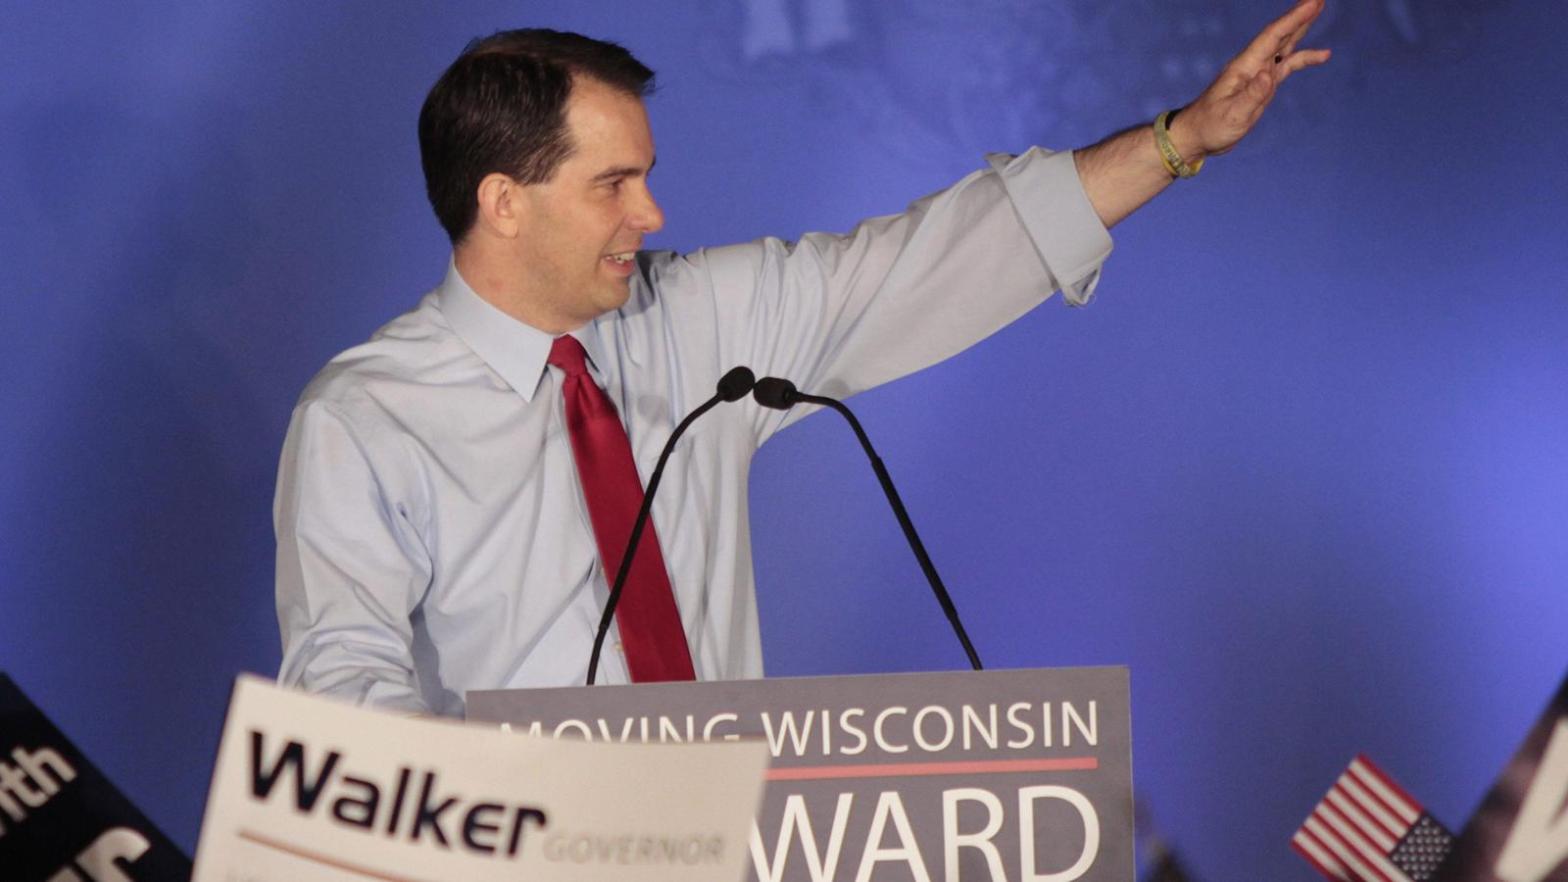 Republican Wisconsin Governor Walker celebrates his victory in the recall election against Democratic challenger and Milwaukee Mayor Barrett in Waukesha, Wisconsin